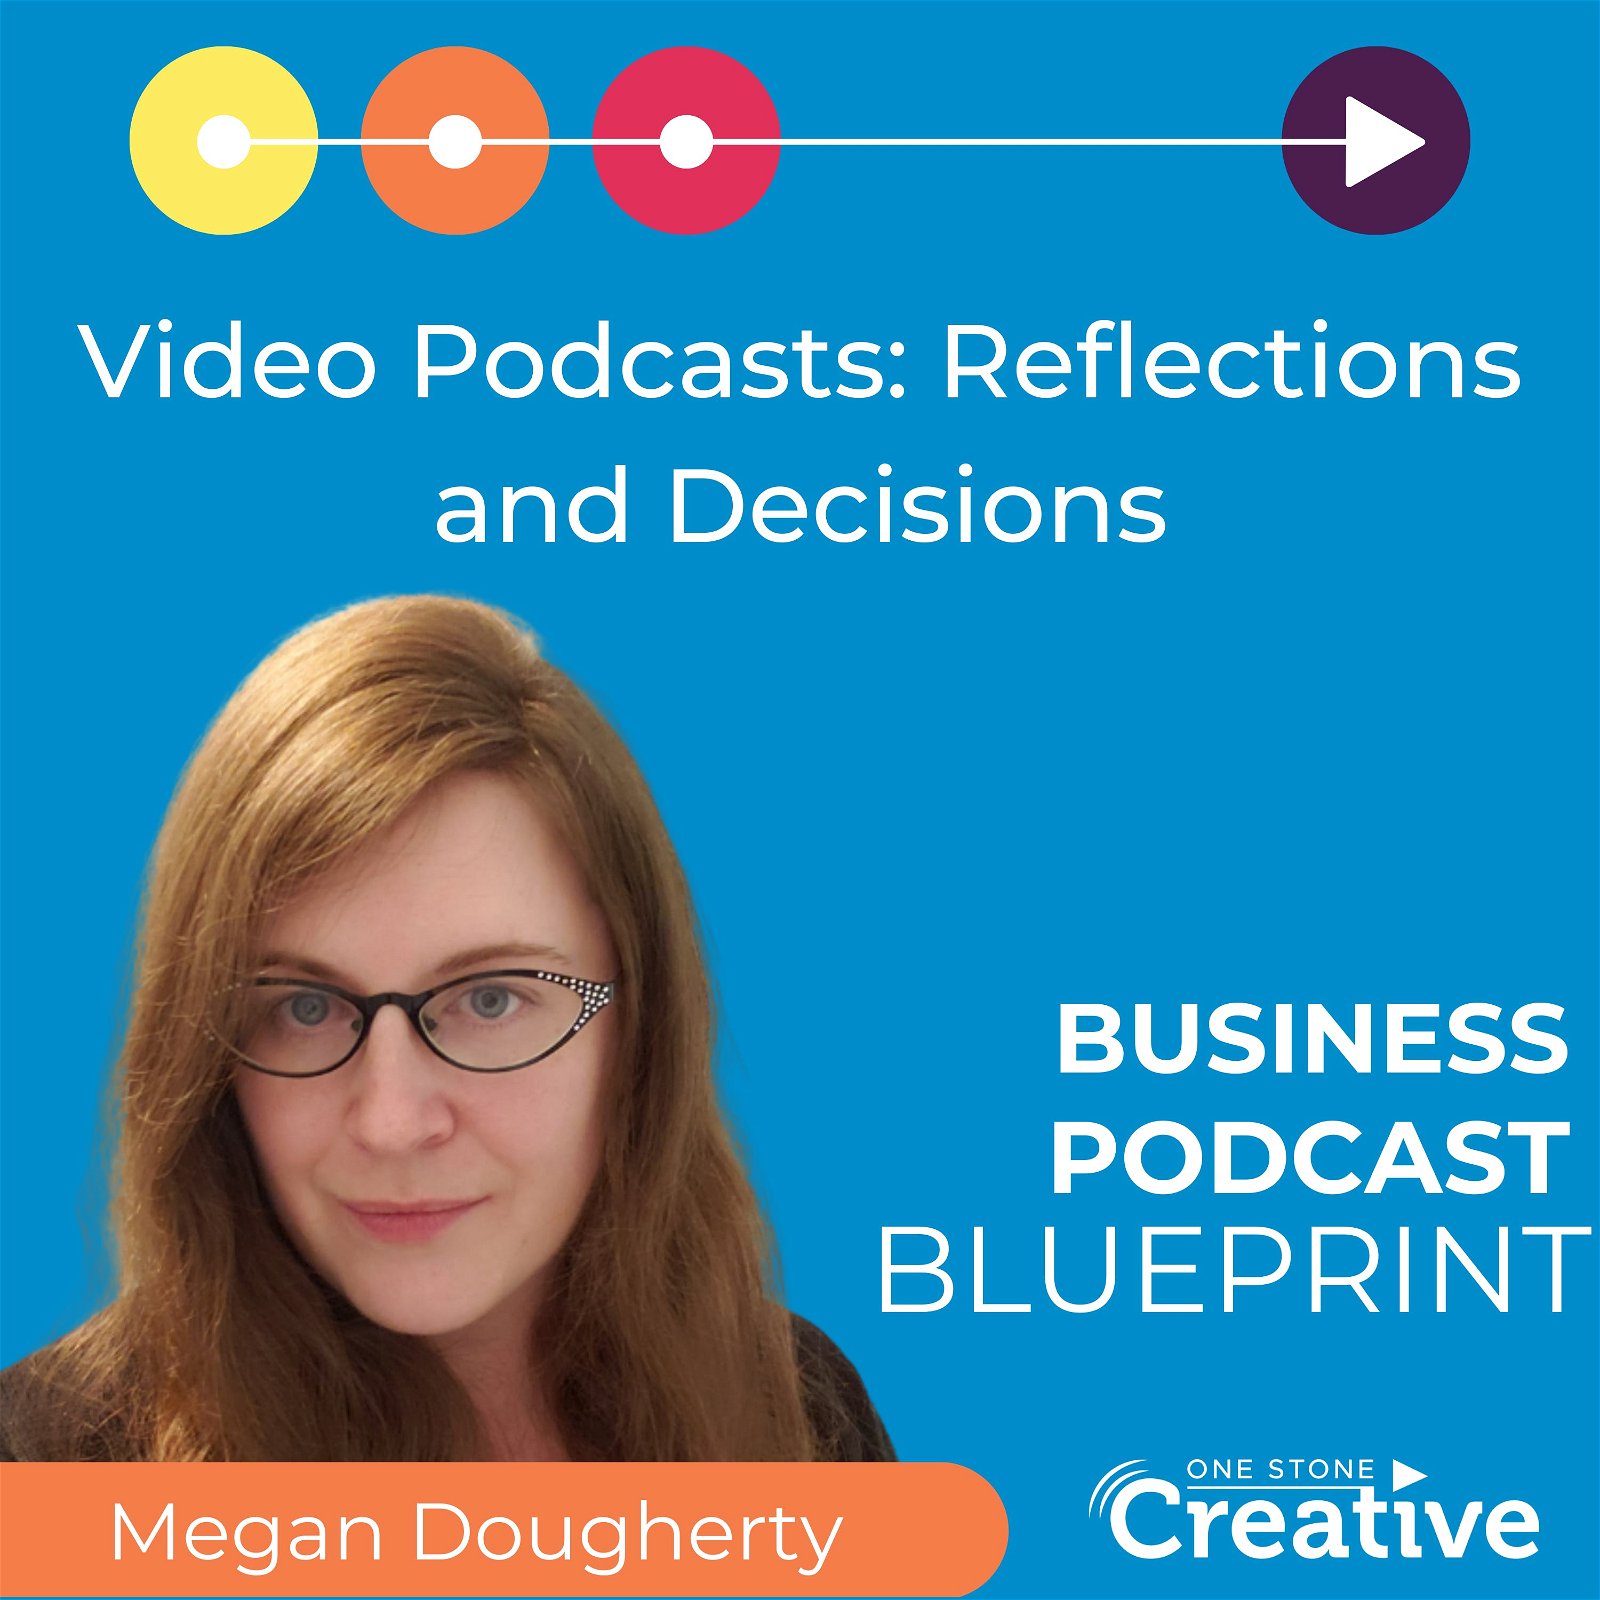 Video Podcasts: Reflections and Decisions